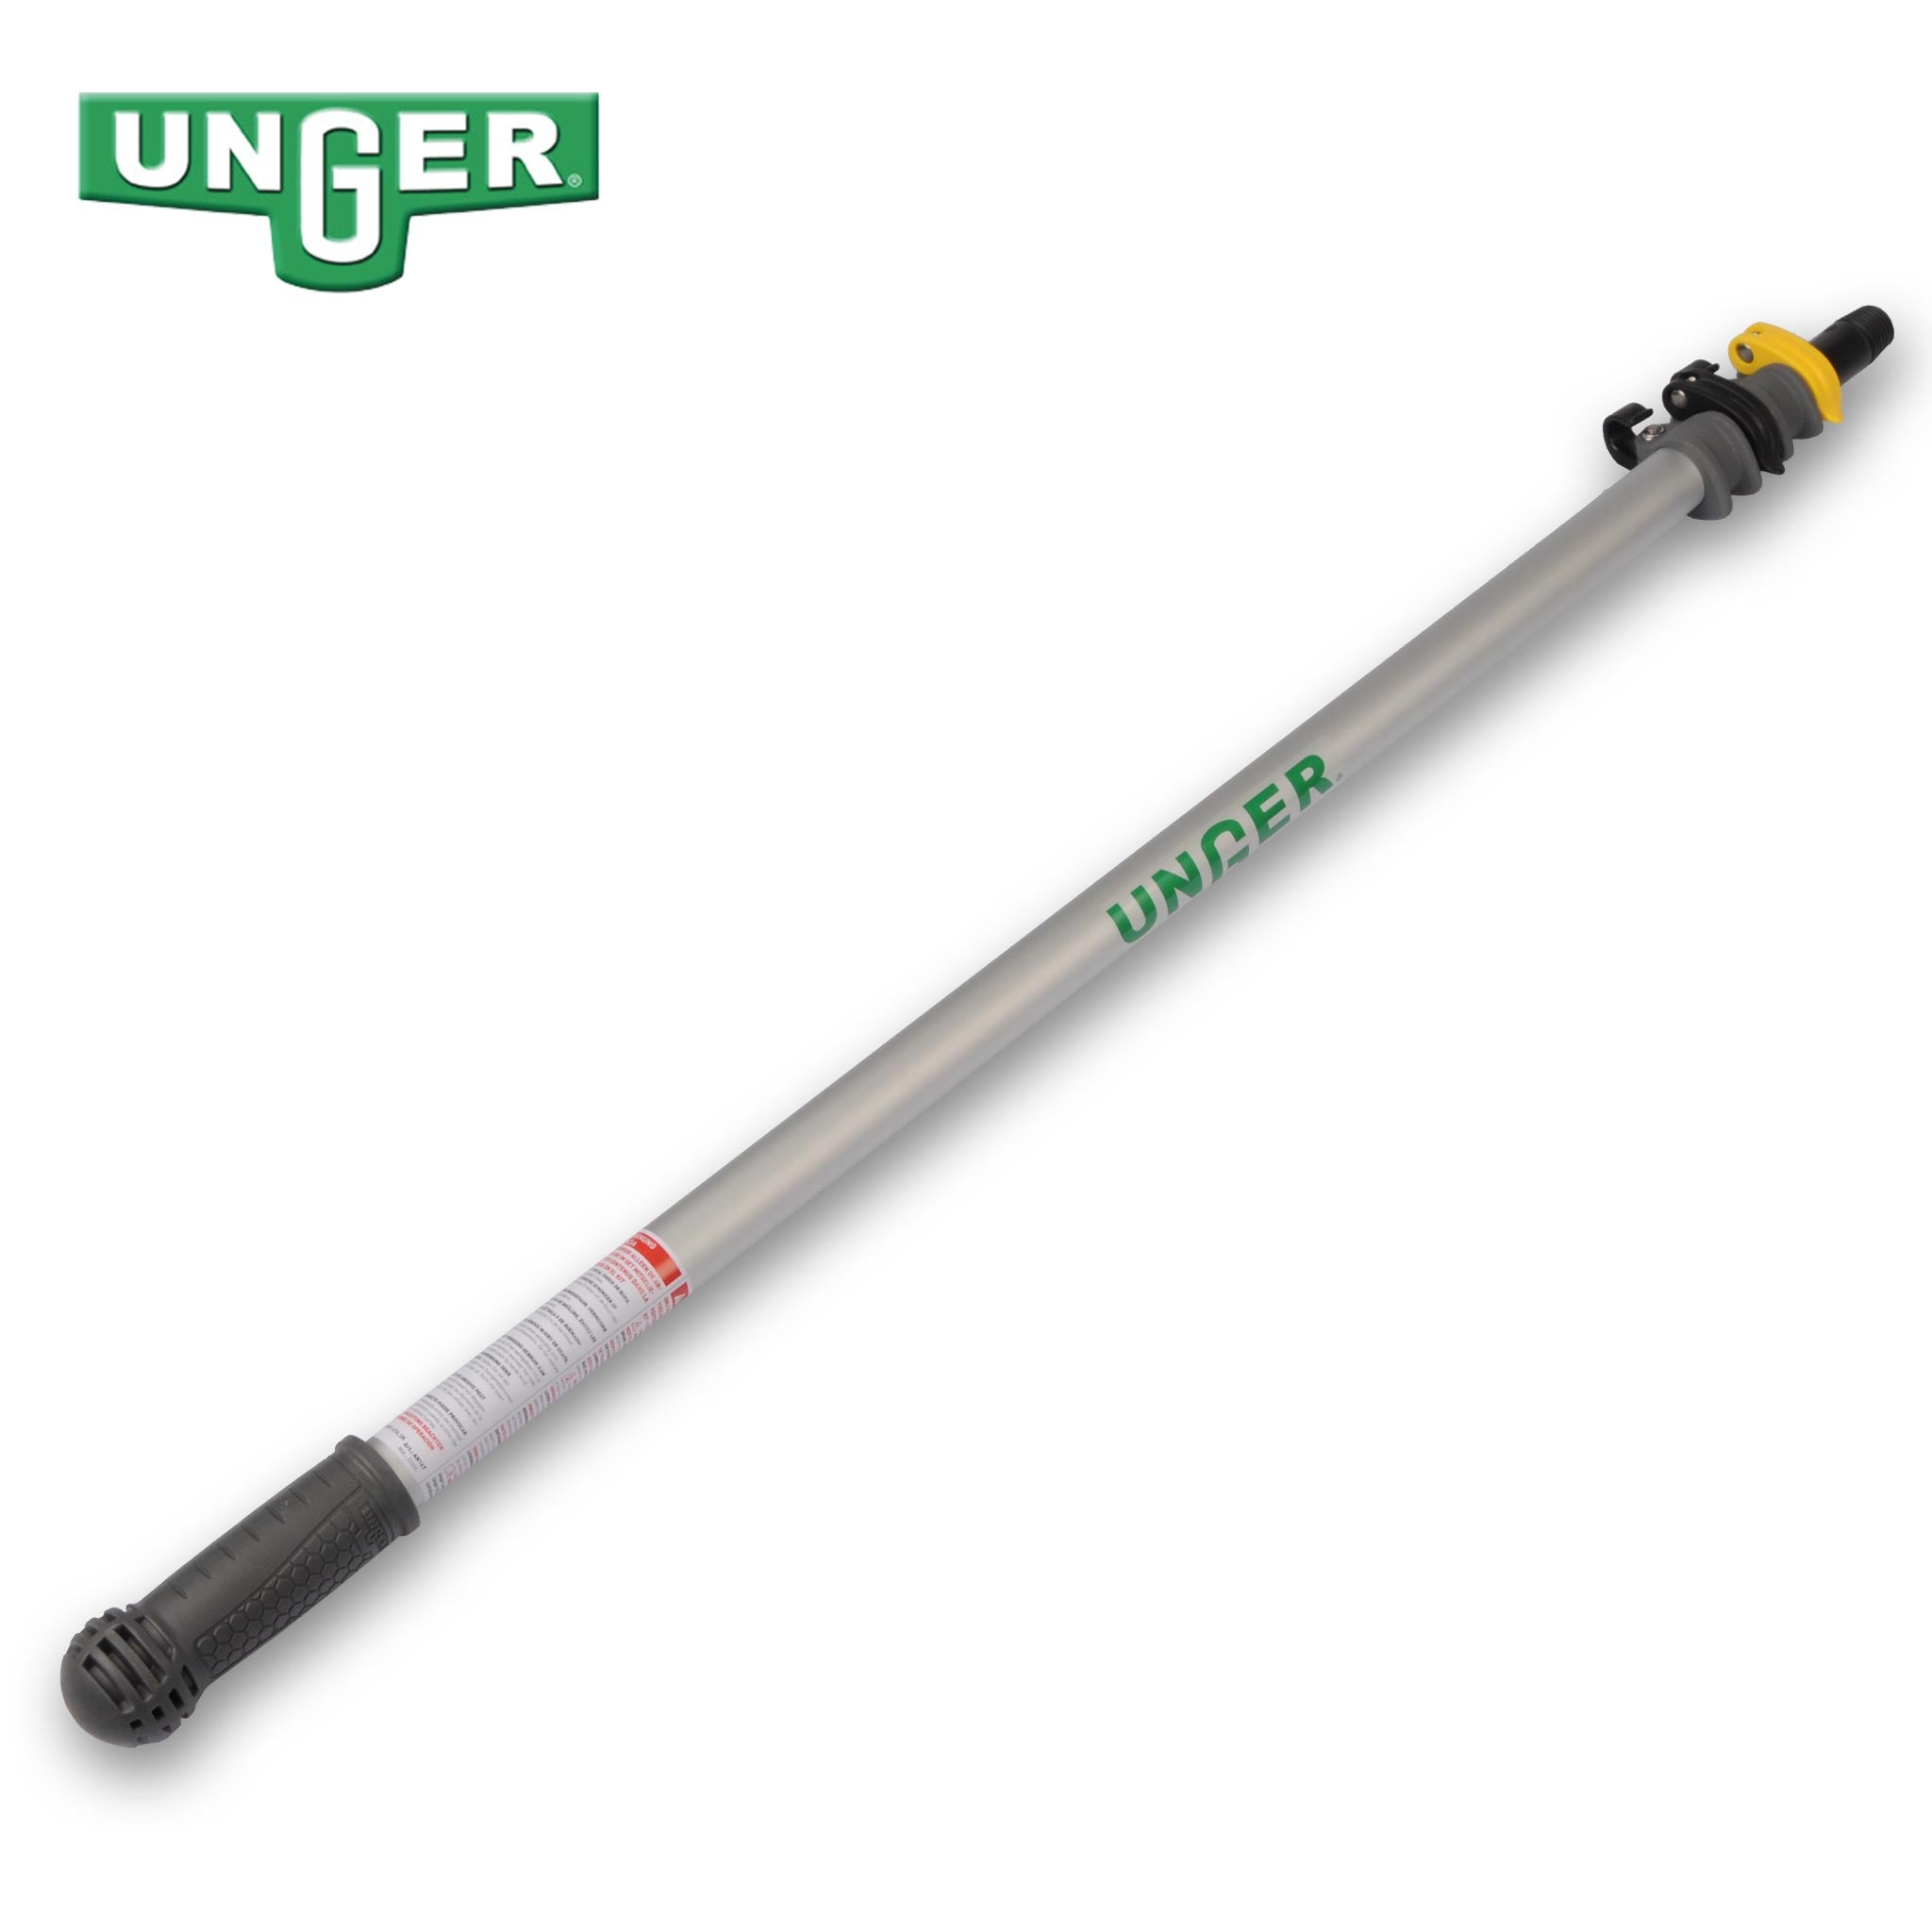 Unger Pure Water Conservatory Cleaning Kit